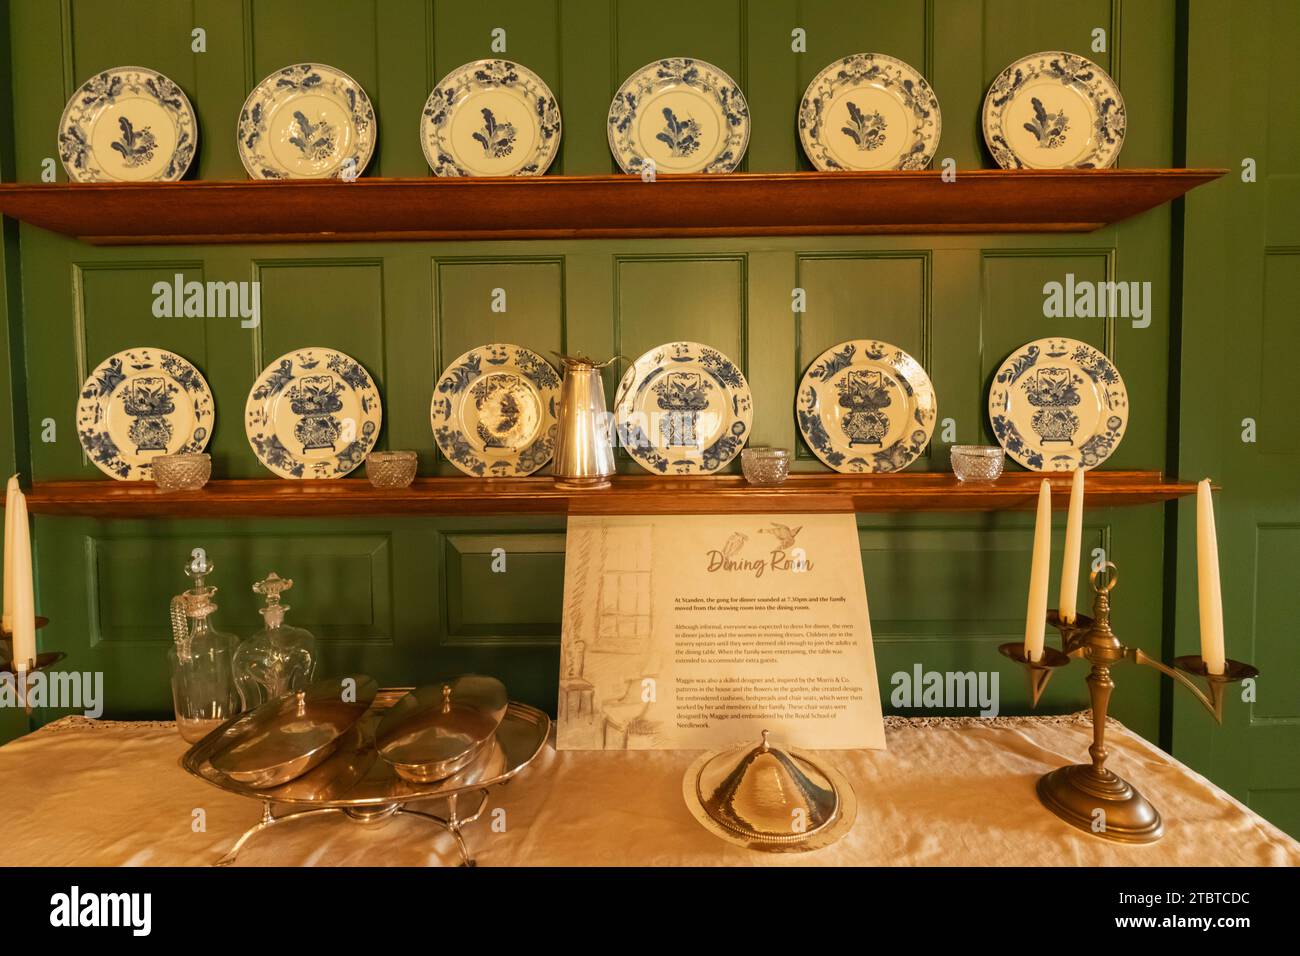 England, West Sussex, East Grinstead, Standen House and Garden, The Dining Room, Display of Vintage Crockery Stock Photo